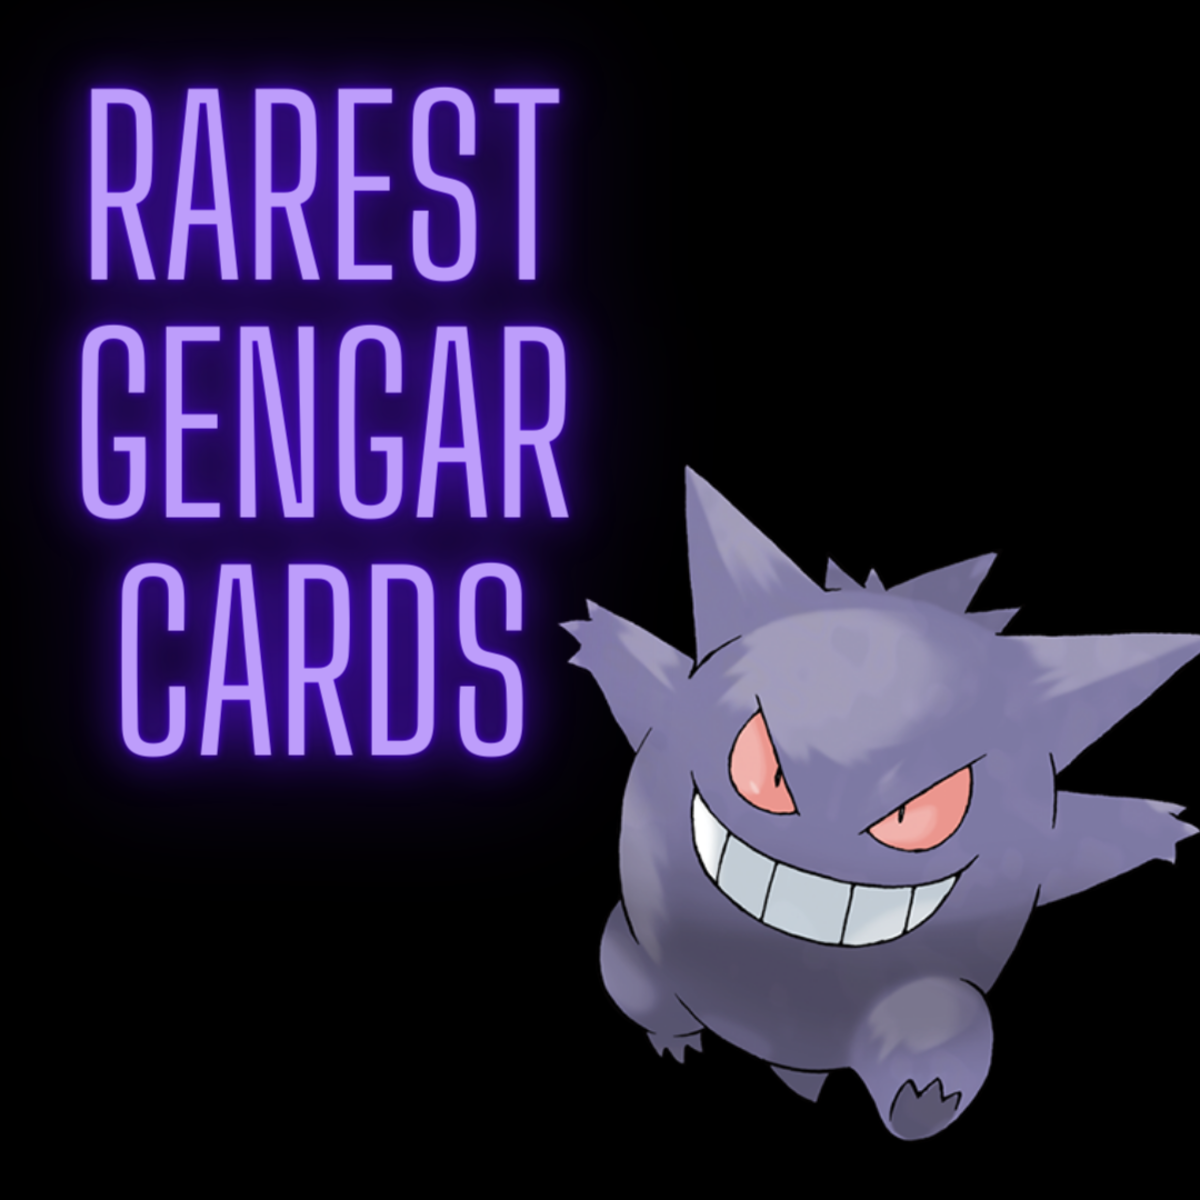 Pokémon TCG: 5 of the Rarest and Most Valuable Gengar Cards